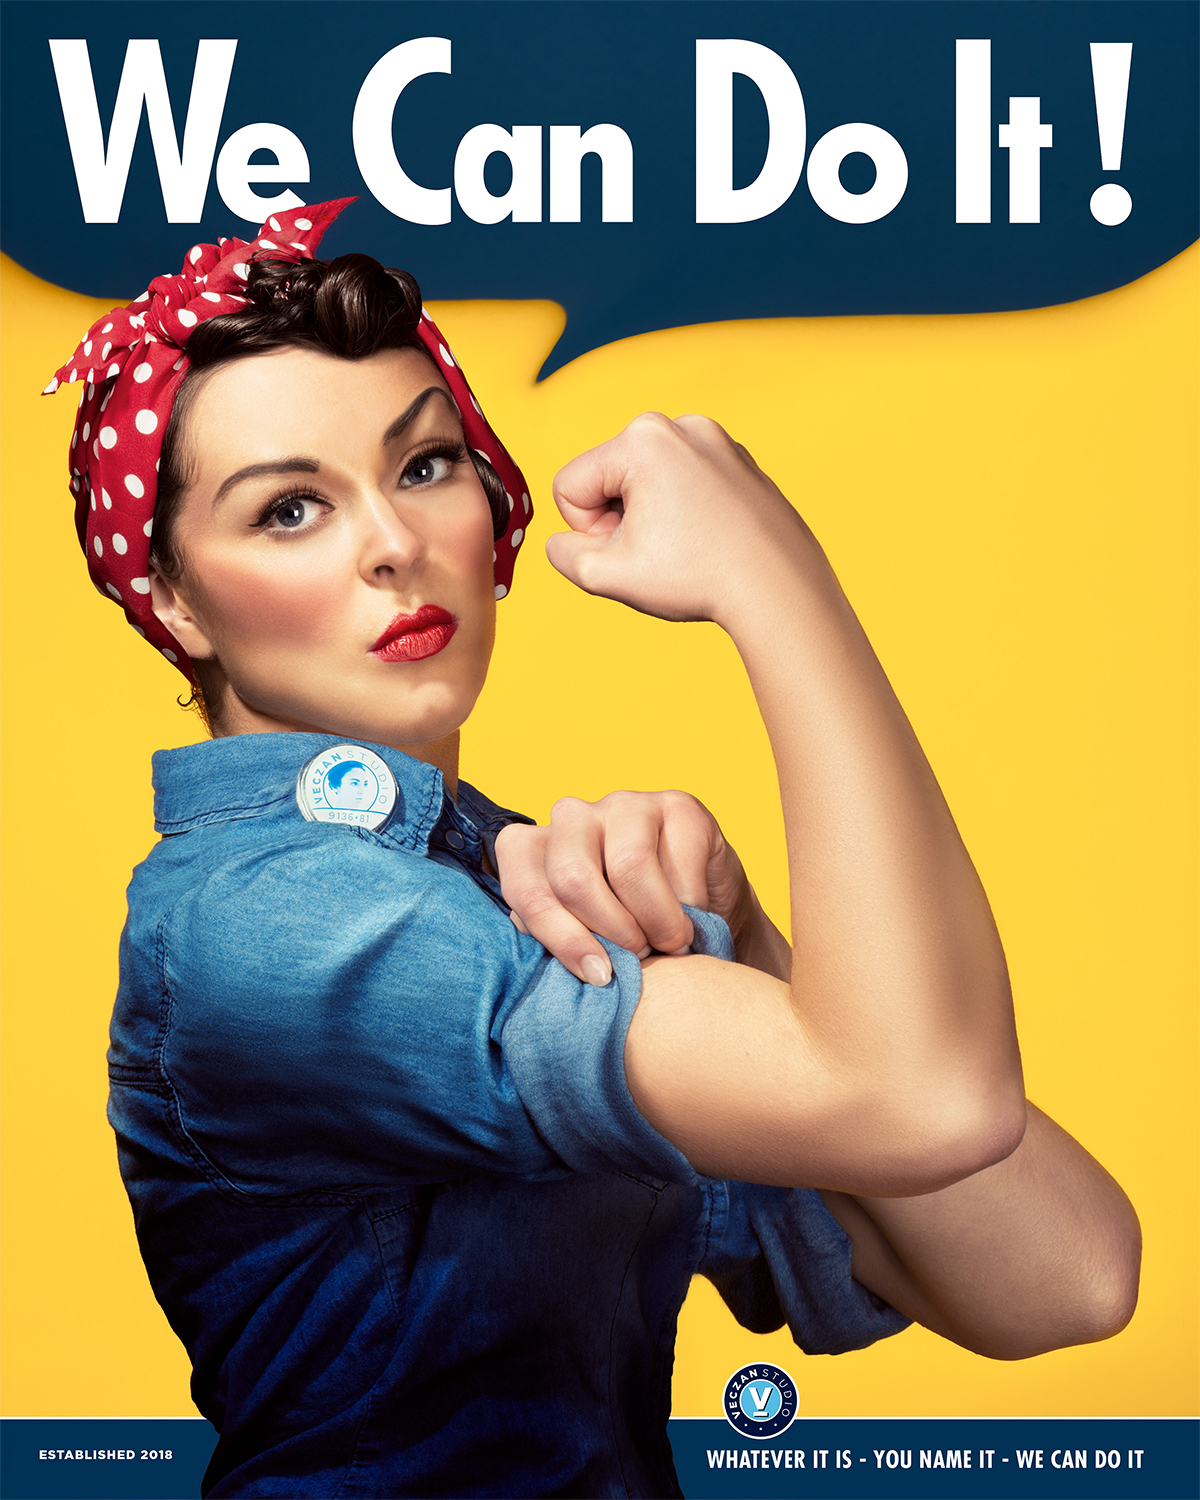 We can do it poster - 2019